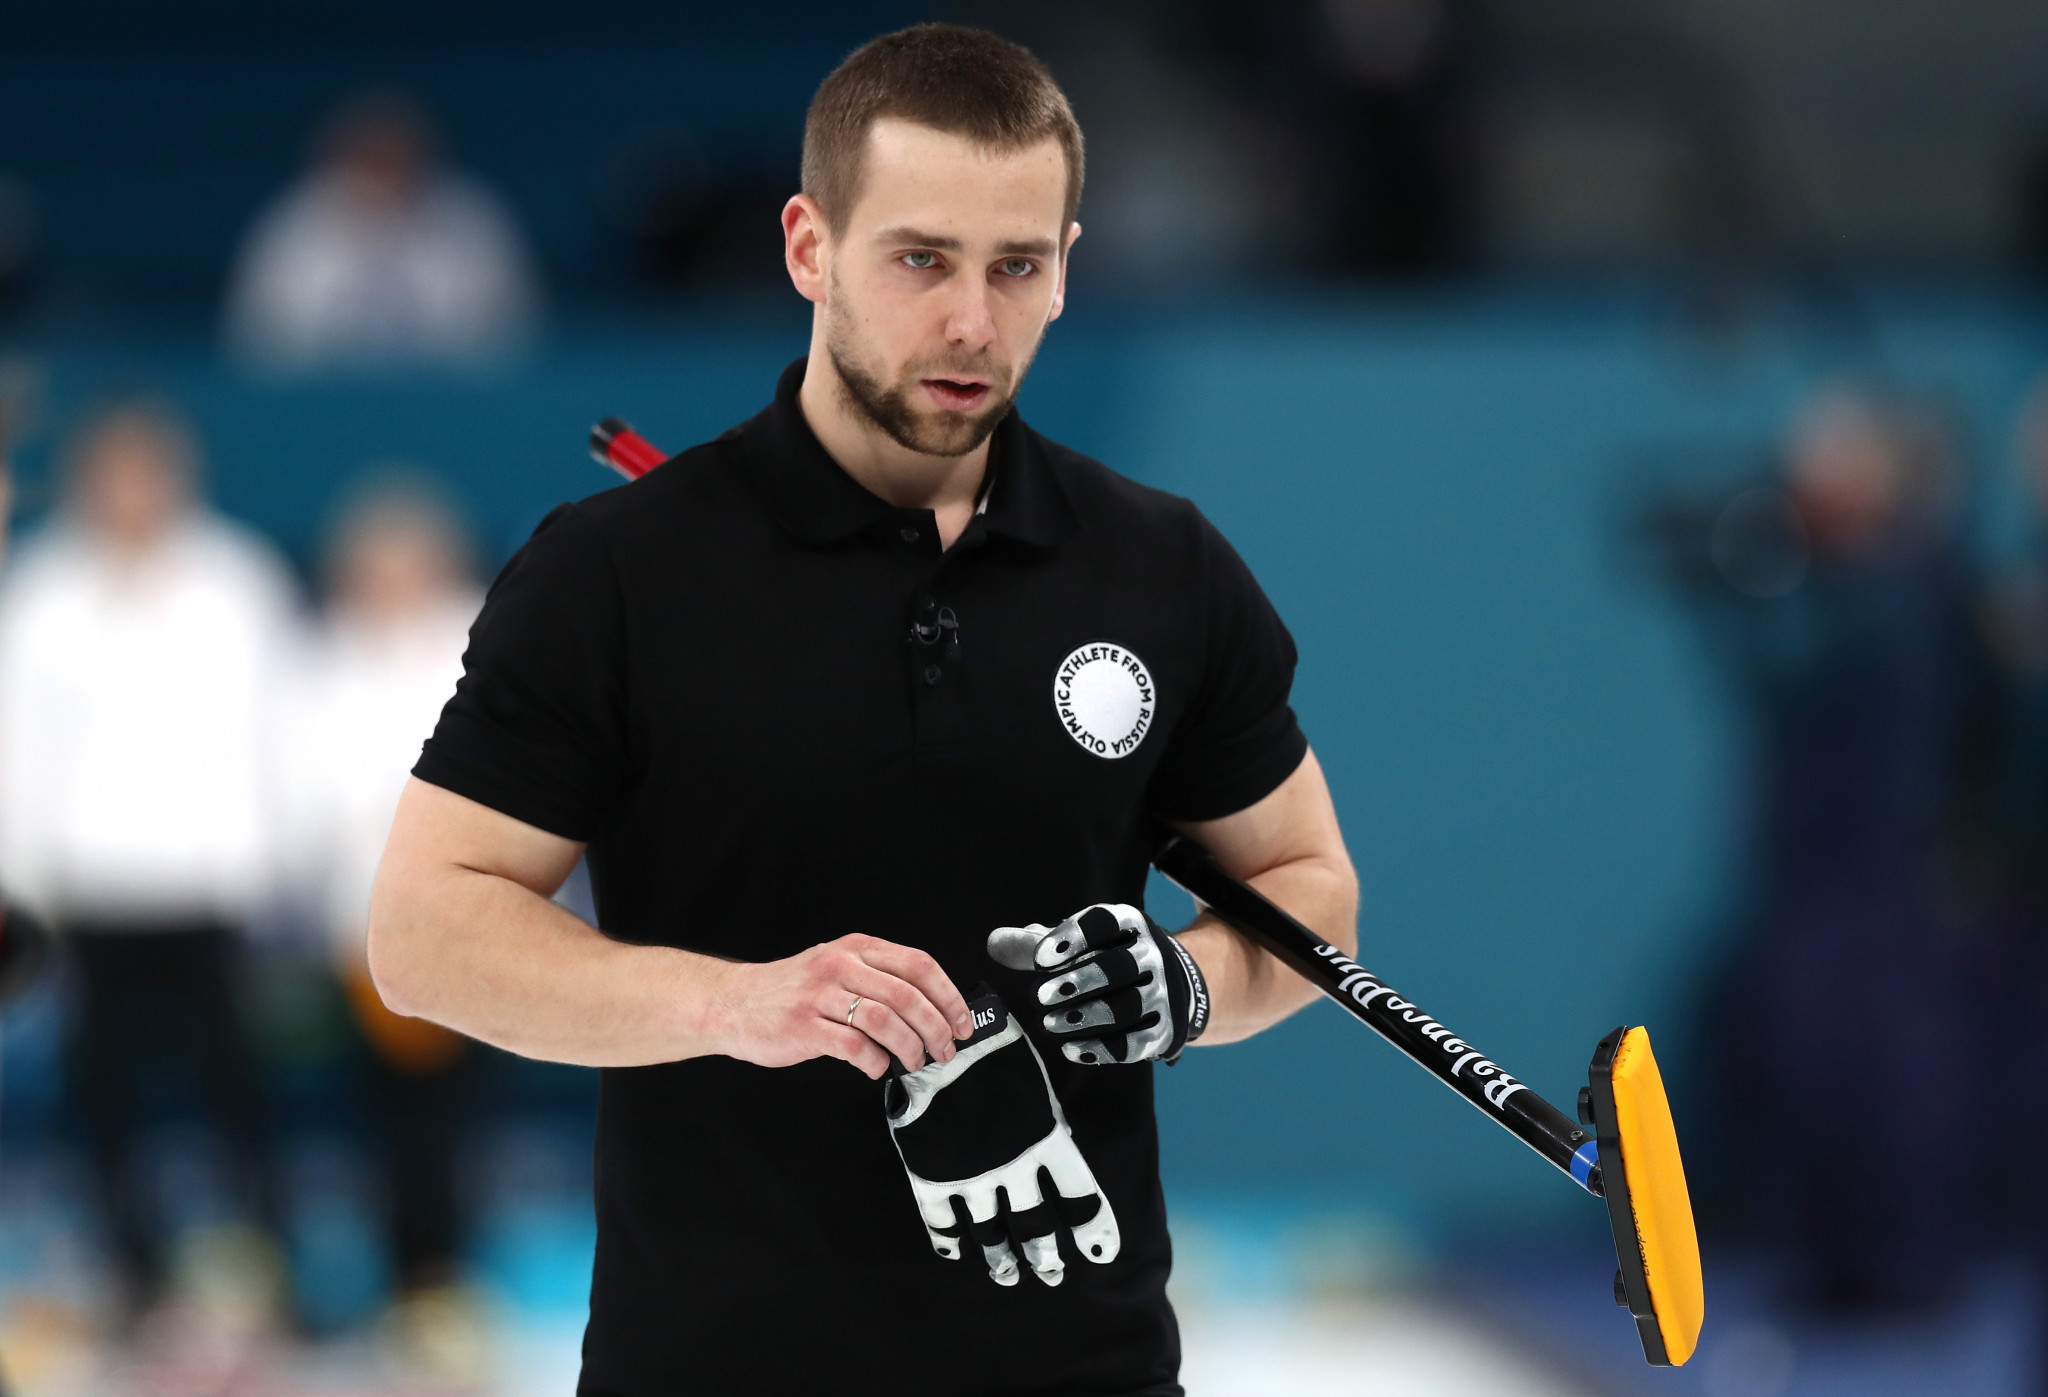 Russian Curling Federation President Dmitry Svishchev claimed the case, like Aleksandr Krushelnitckii's doping violation, was an attack on Russia before a major sports event ©Getty Images